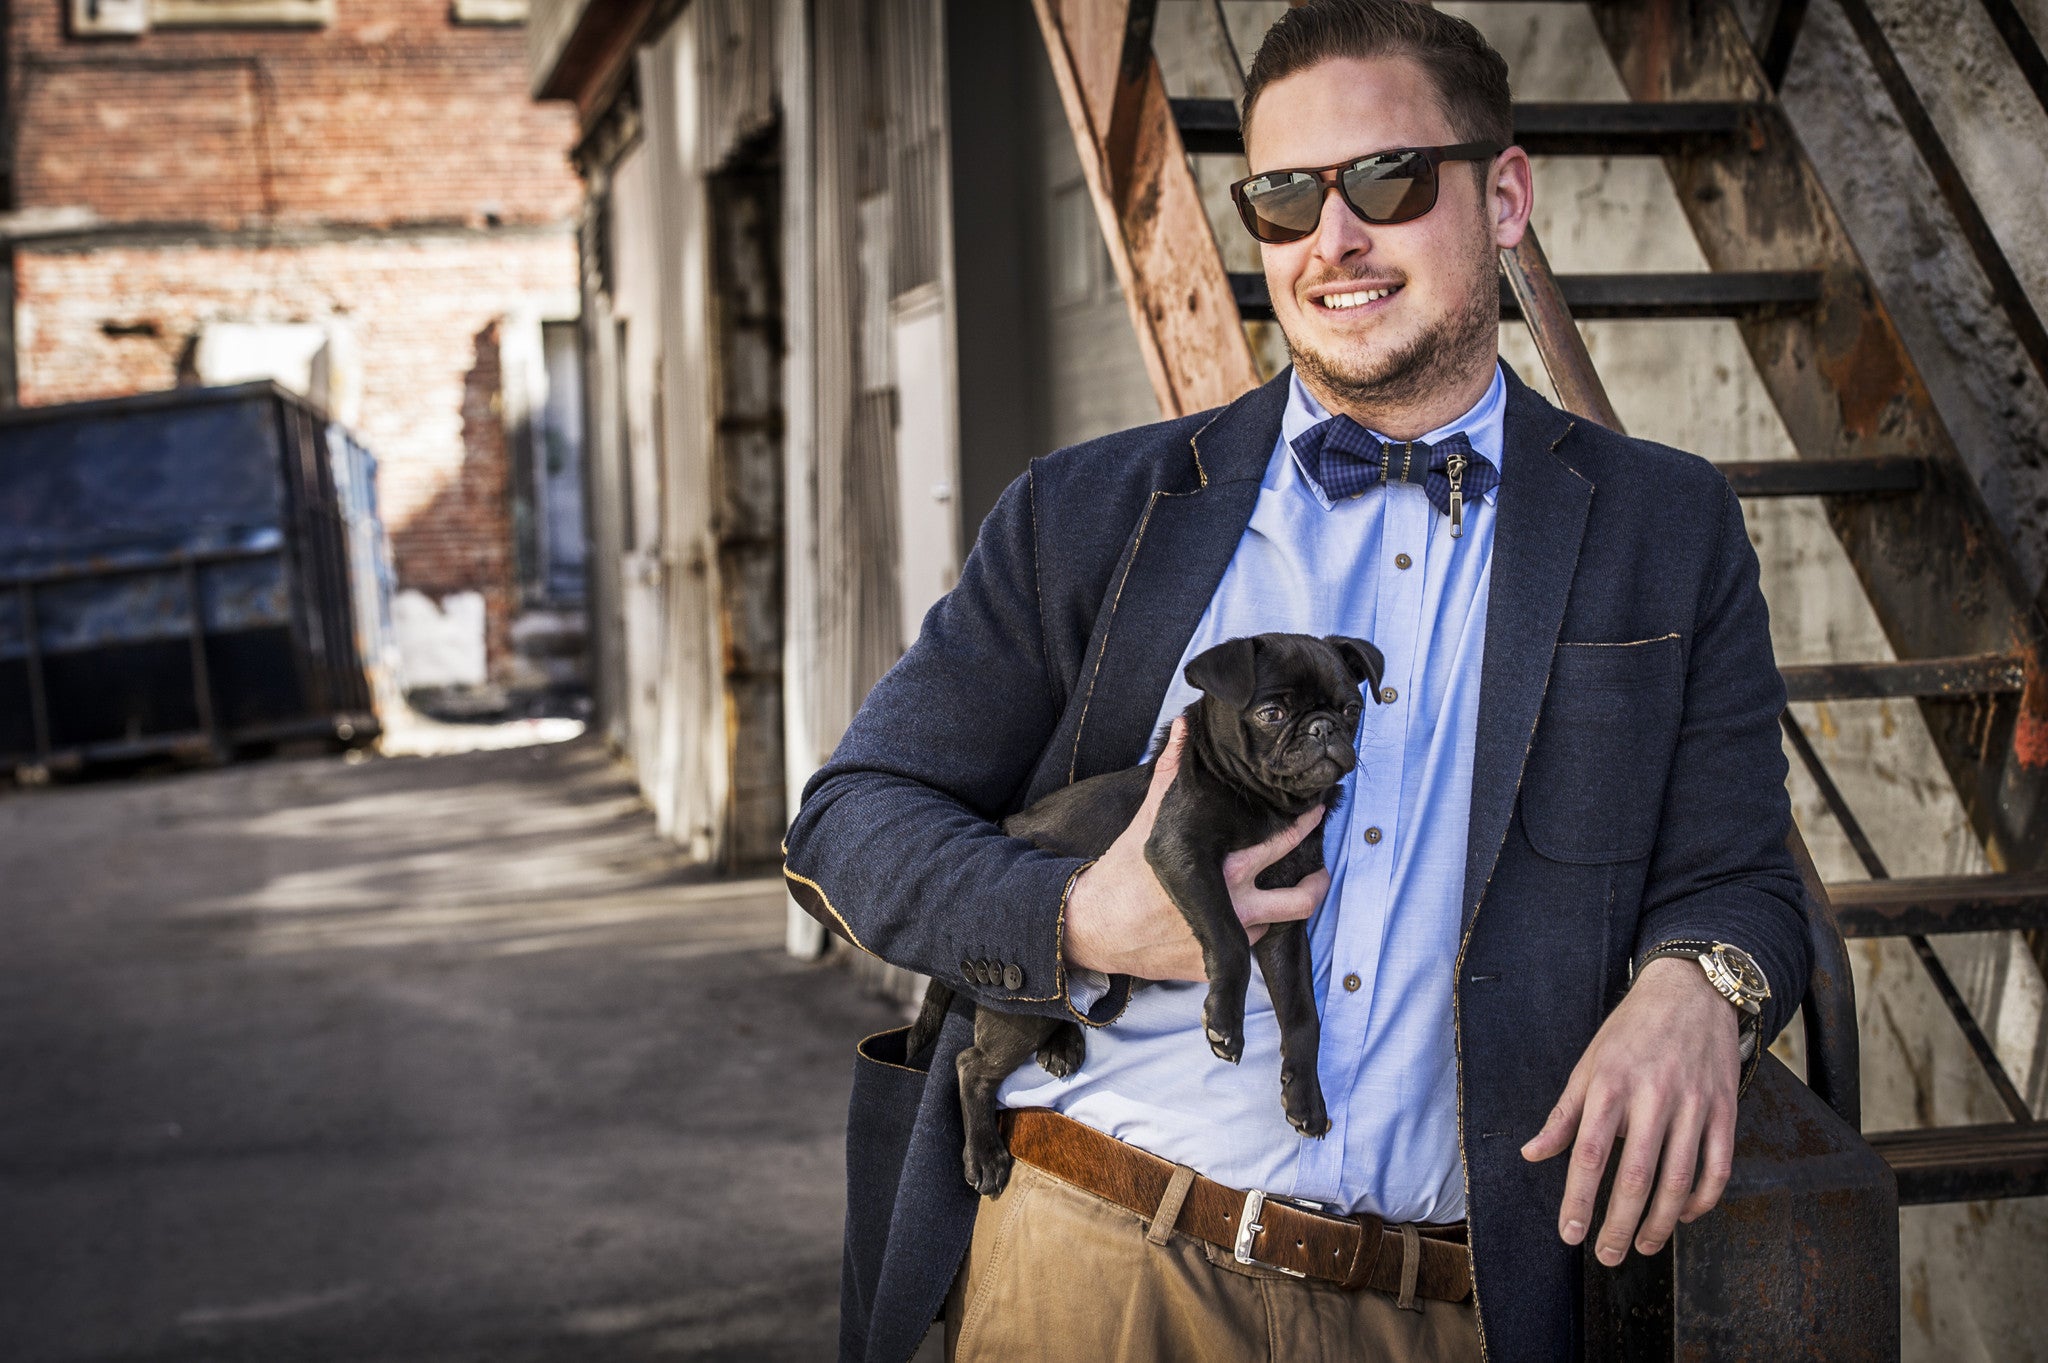 Dare to wear high-end handmade ties and bow ties from Swell Fellow